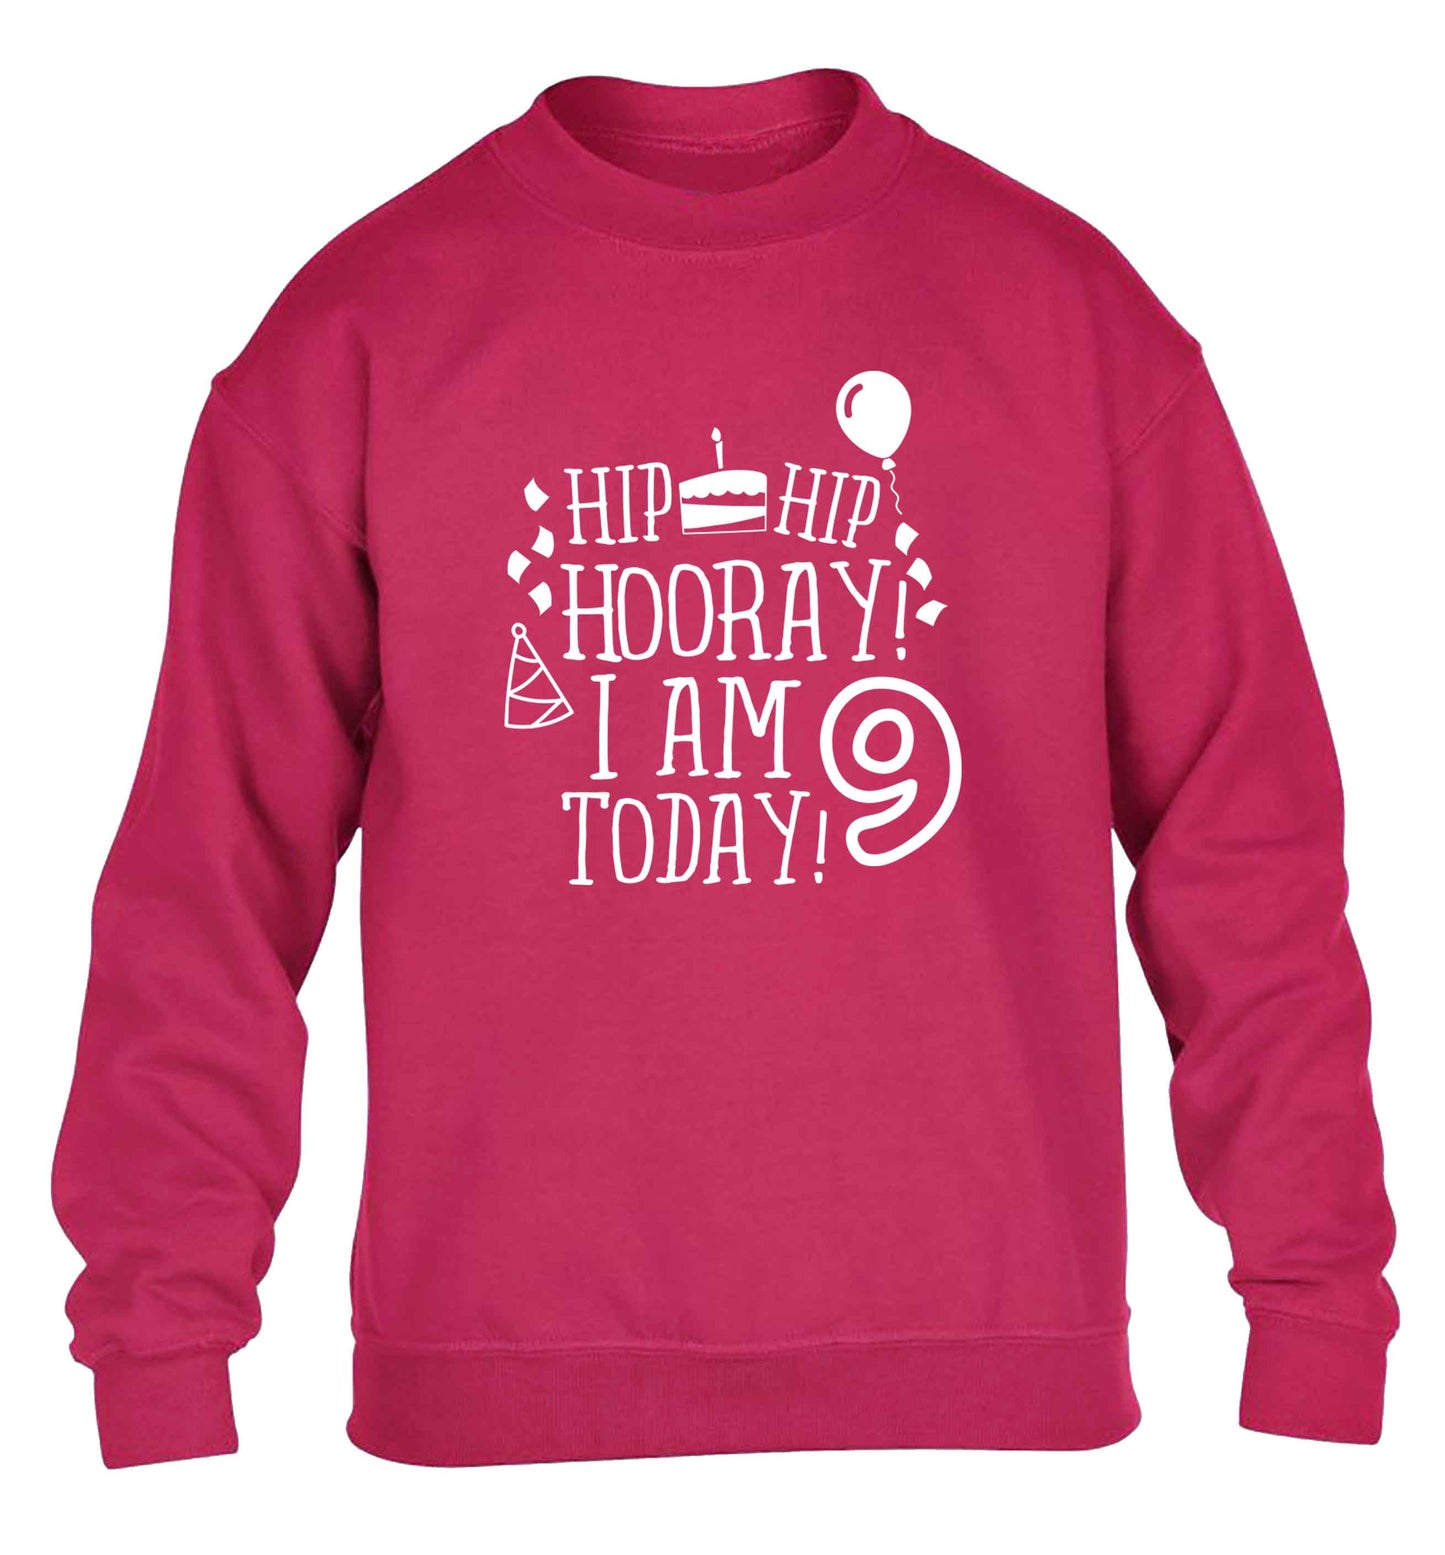 Hip hip hooray I am 9 today! children's pink sweater 12-13 Years